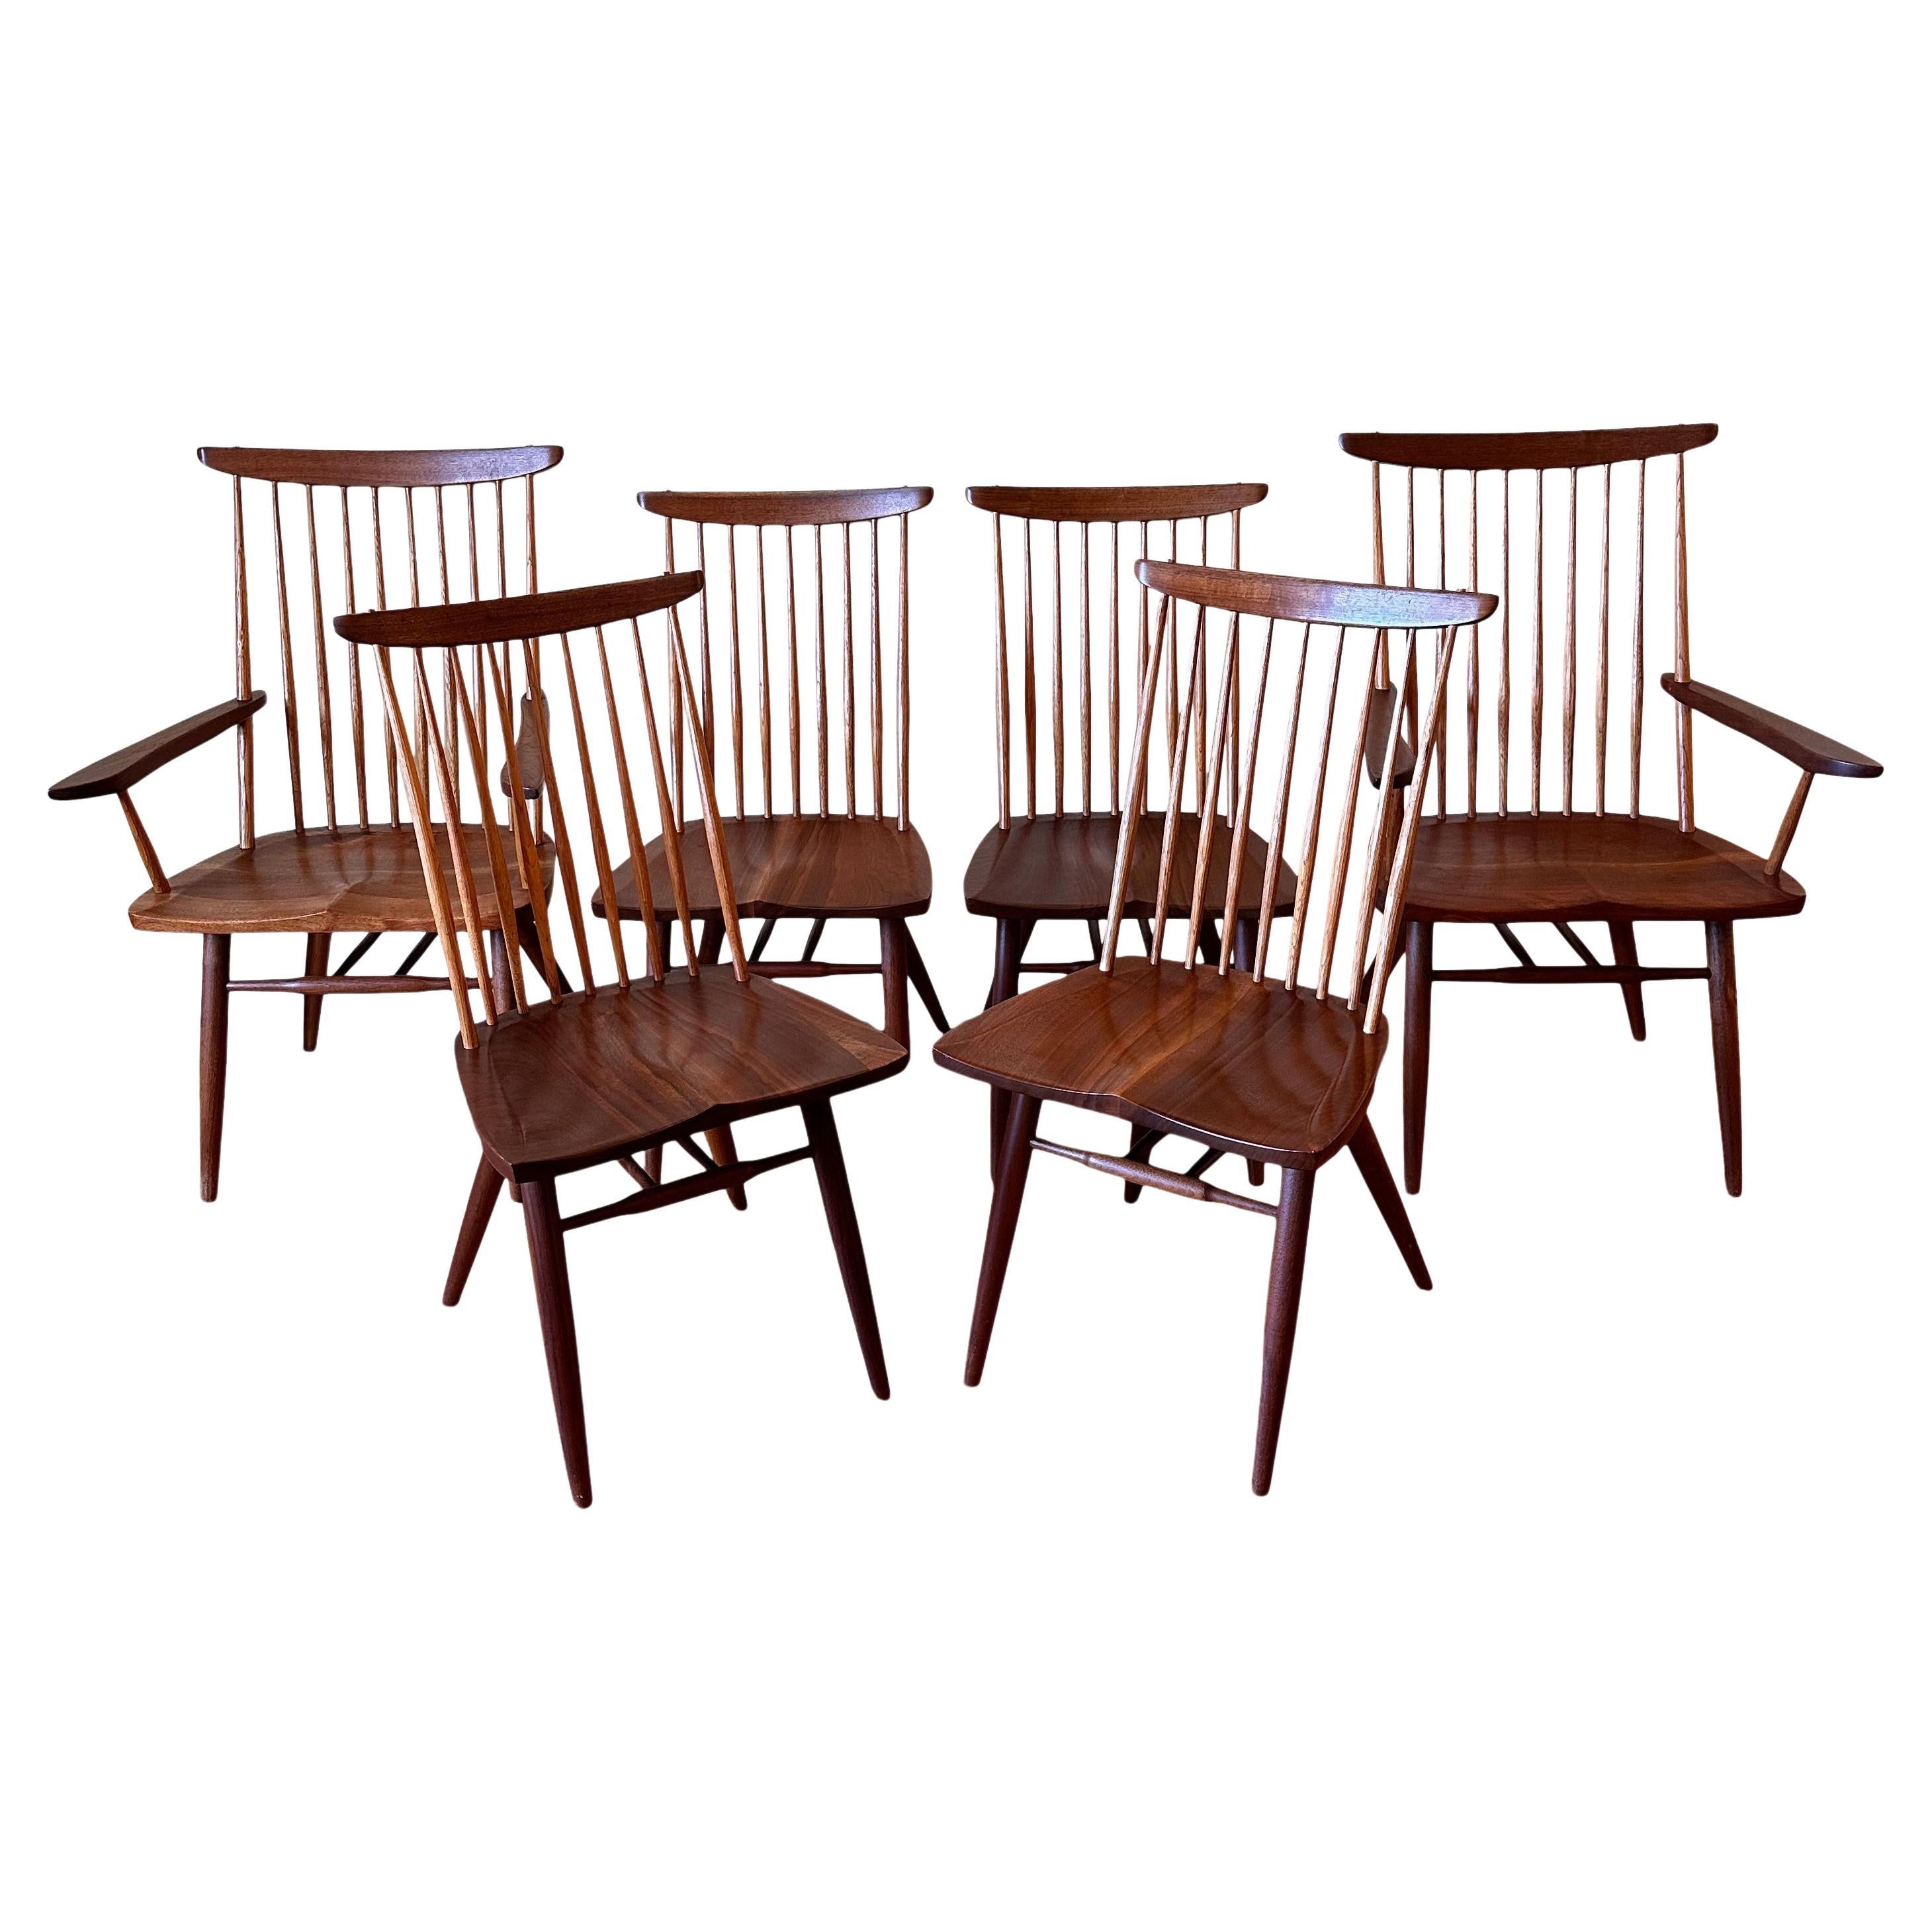 Set of Six New Chairs in Walnut by George Nakashima 1978